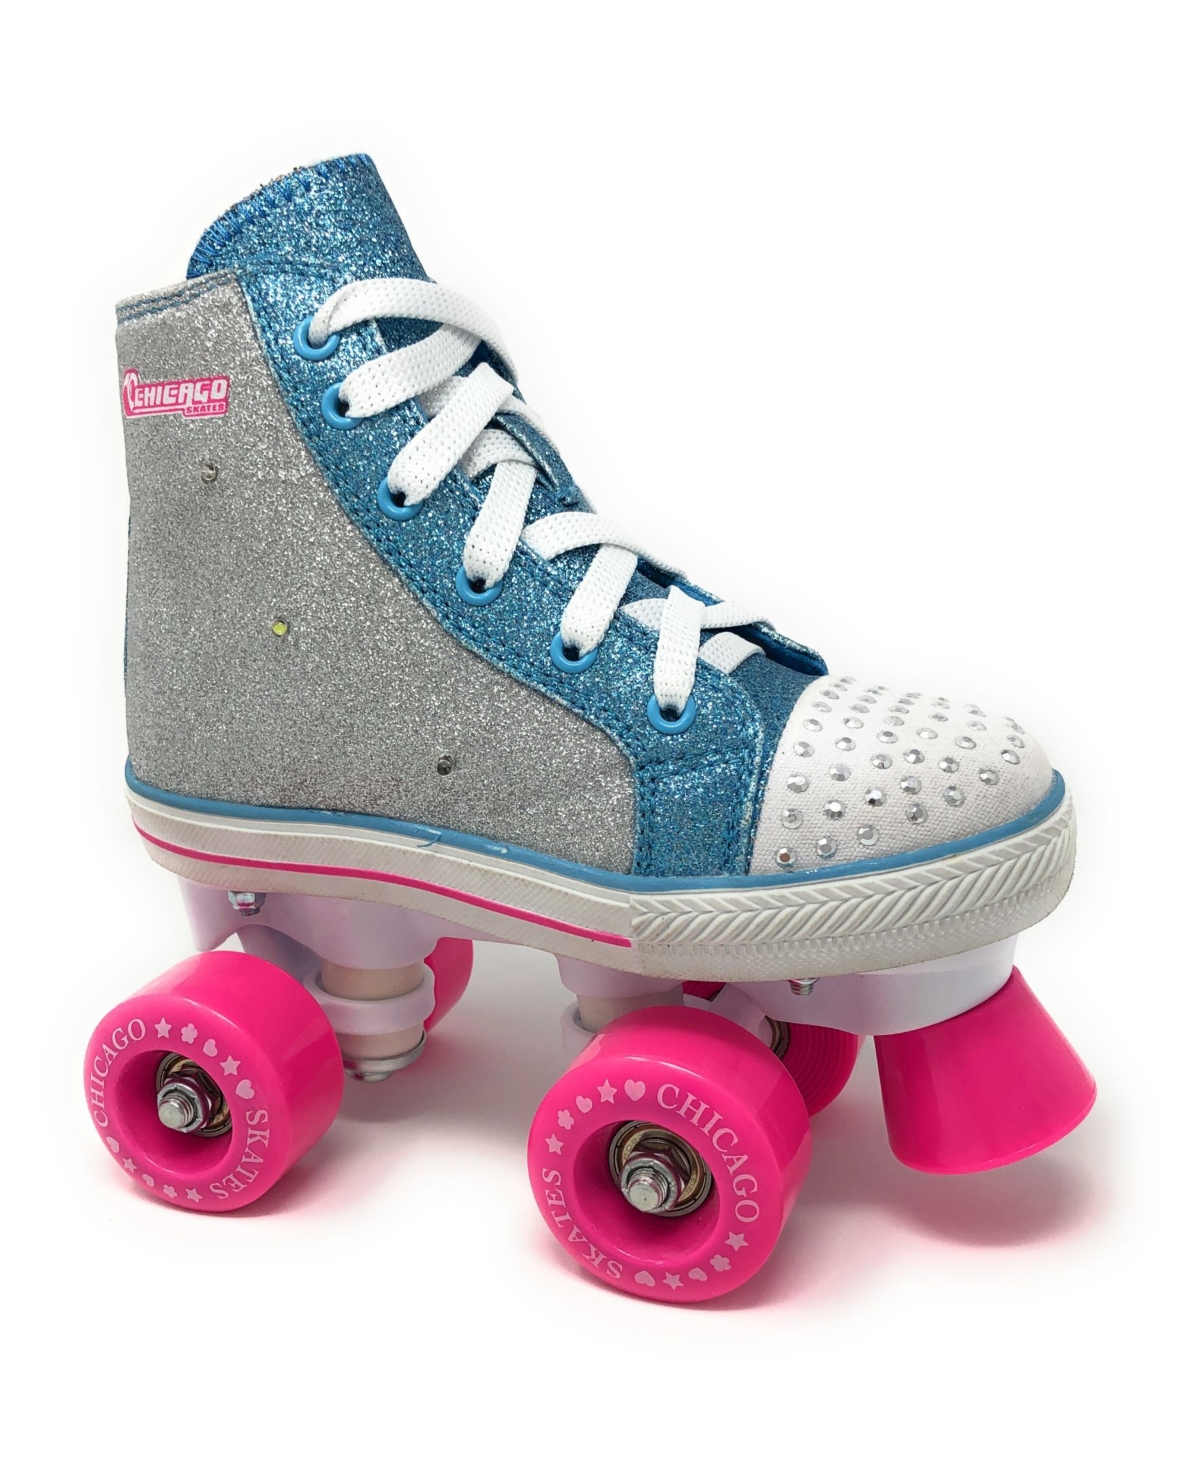 Fashion All-Star Quad Roller Skate - Size 3 - Miscellaneous